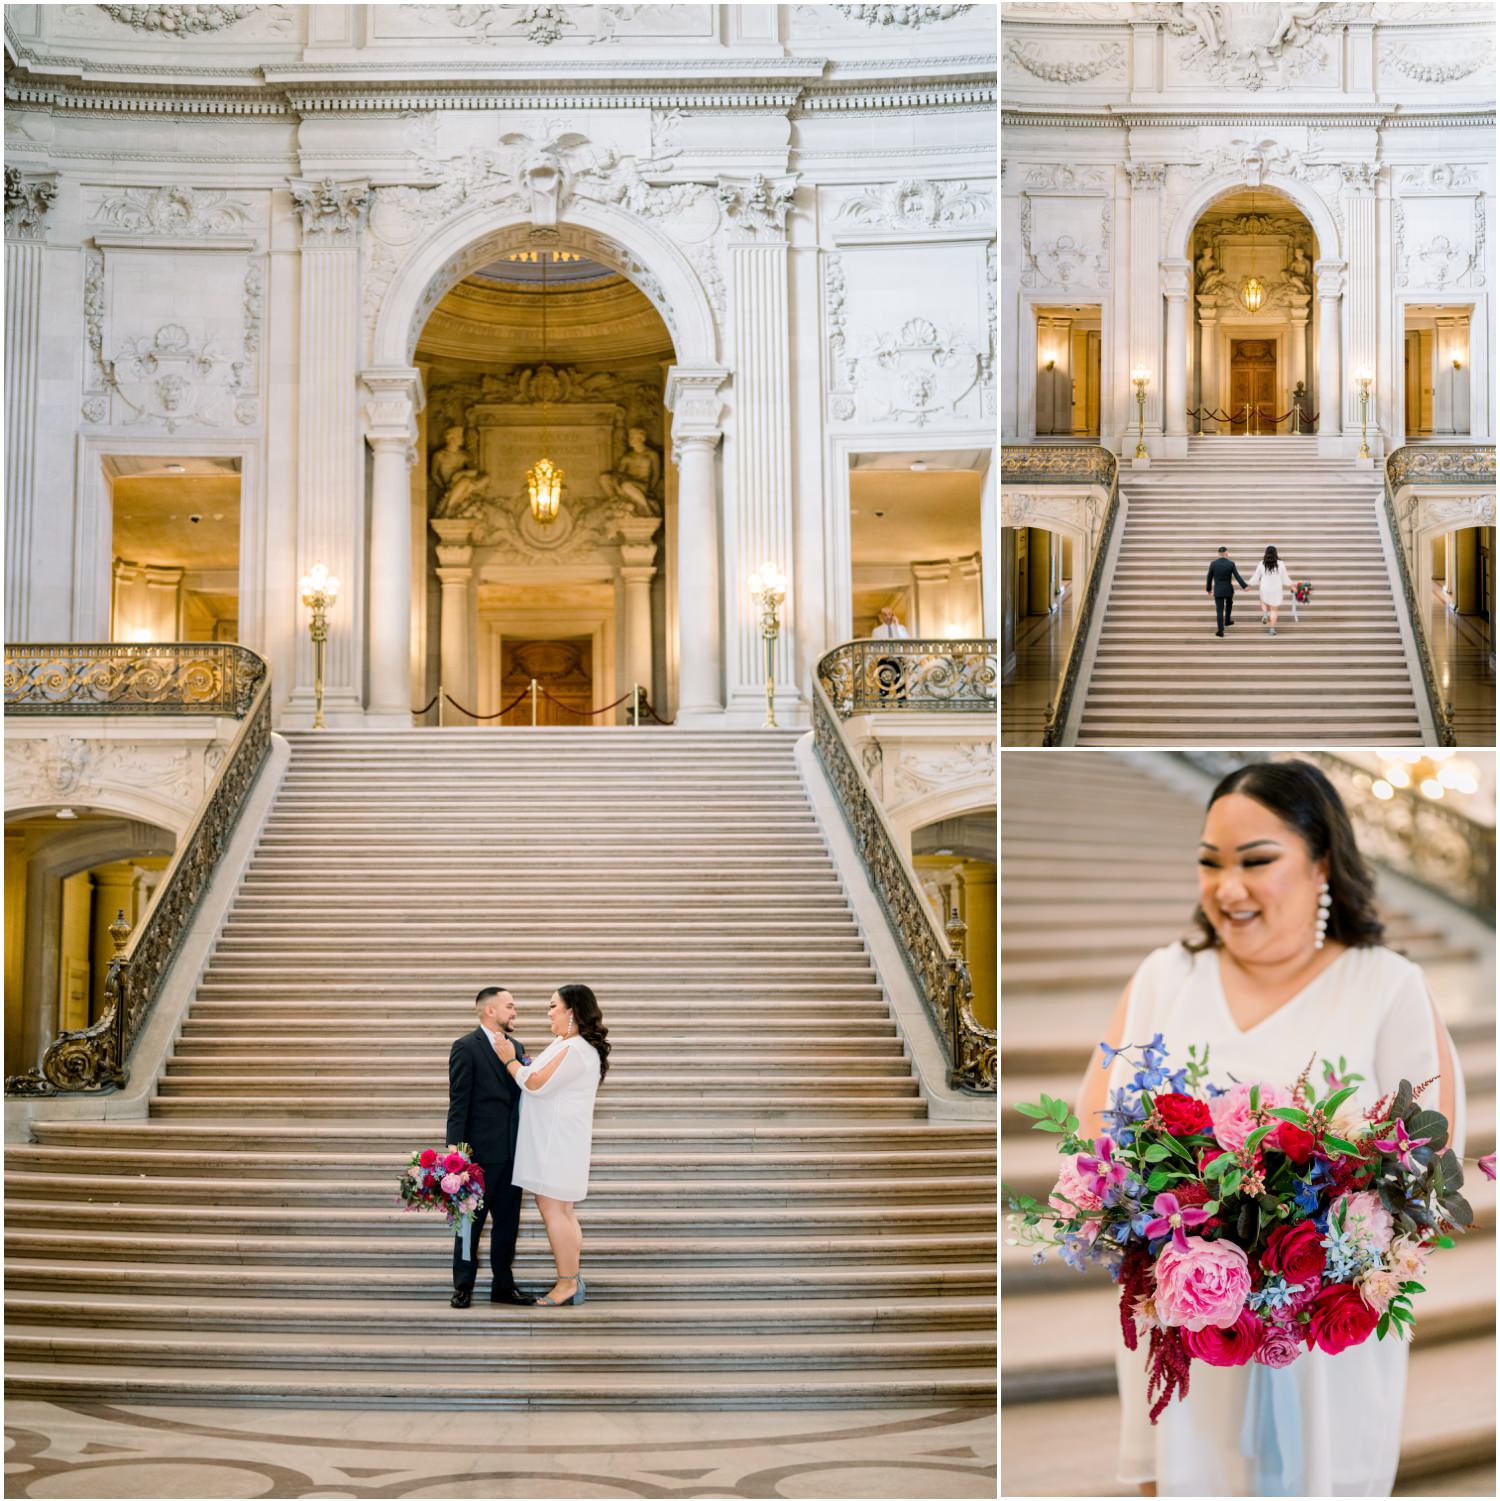 Photo of wedding at sf city hall. Bride with bouquet and bride and groom on grand staircase